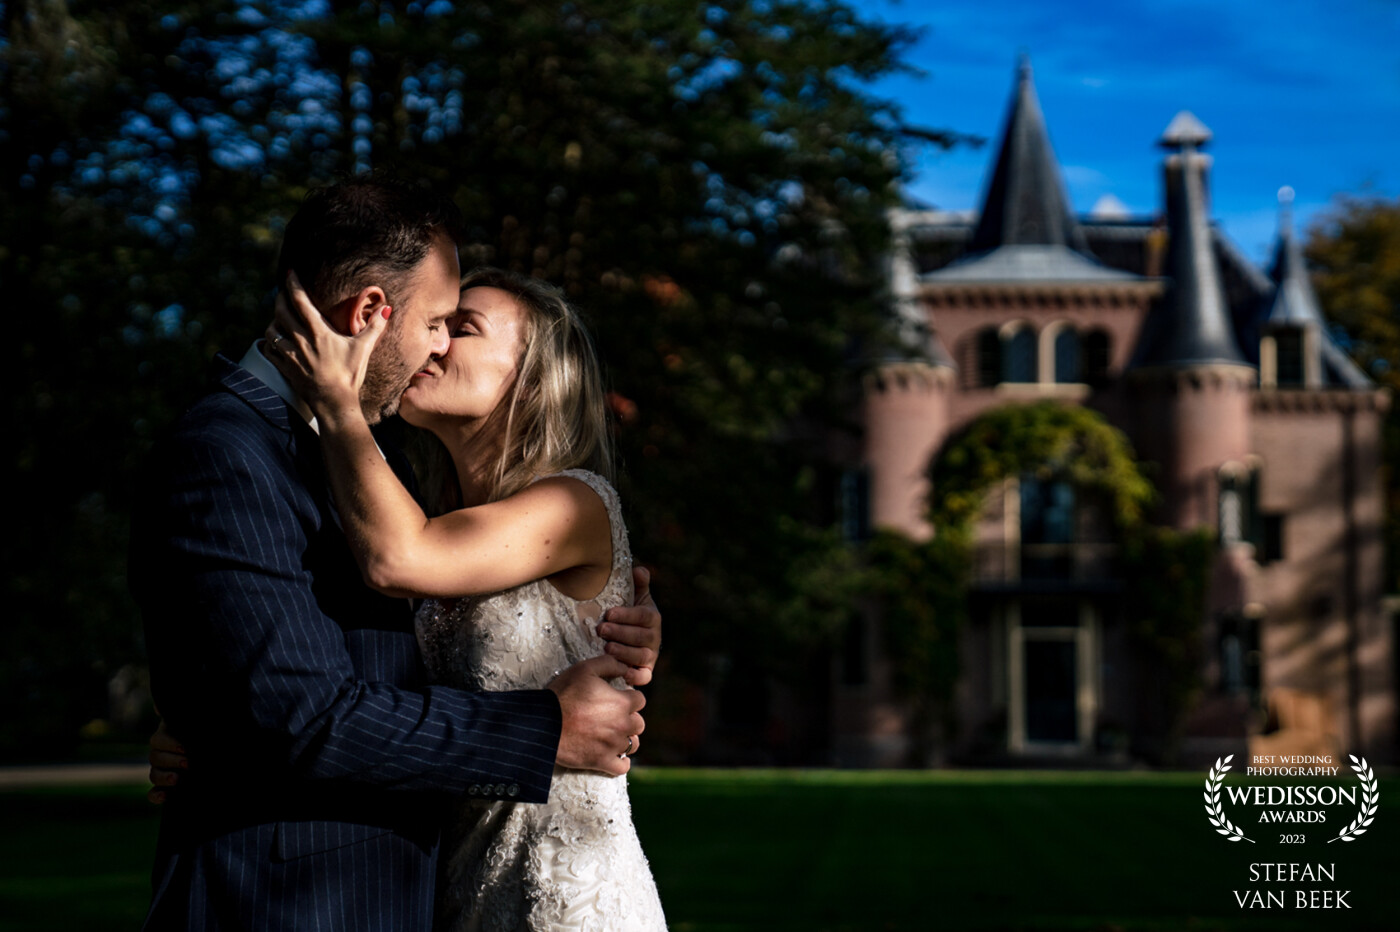 There is something about old castles, love and a lovely couple. And I just absolutely love it when love shows it's passion in front of a castle!